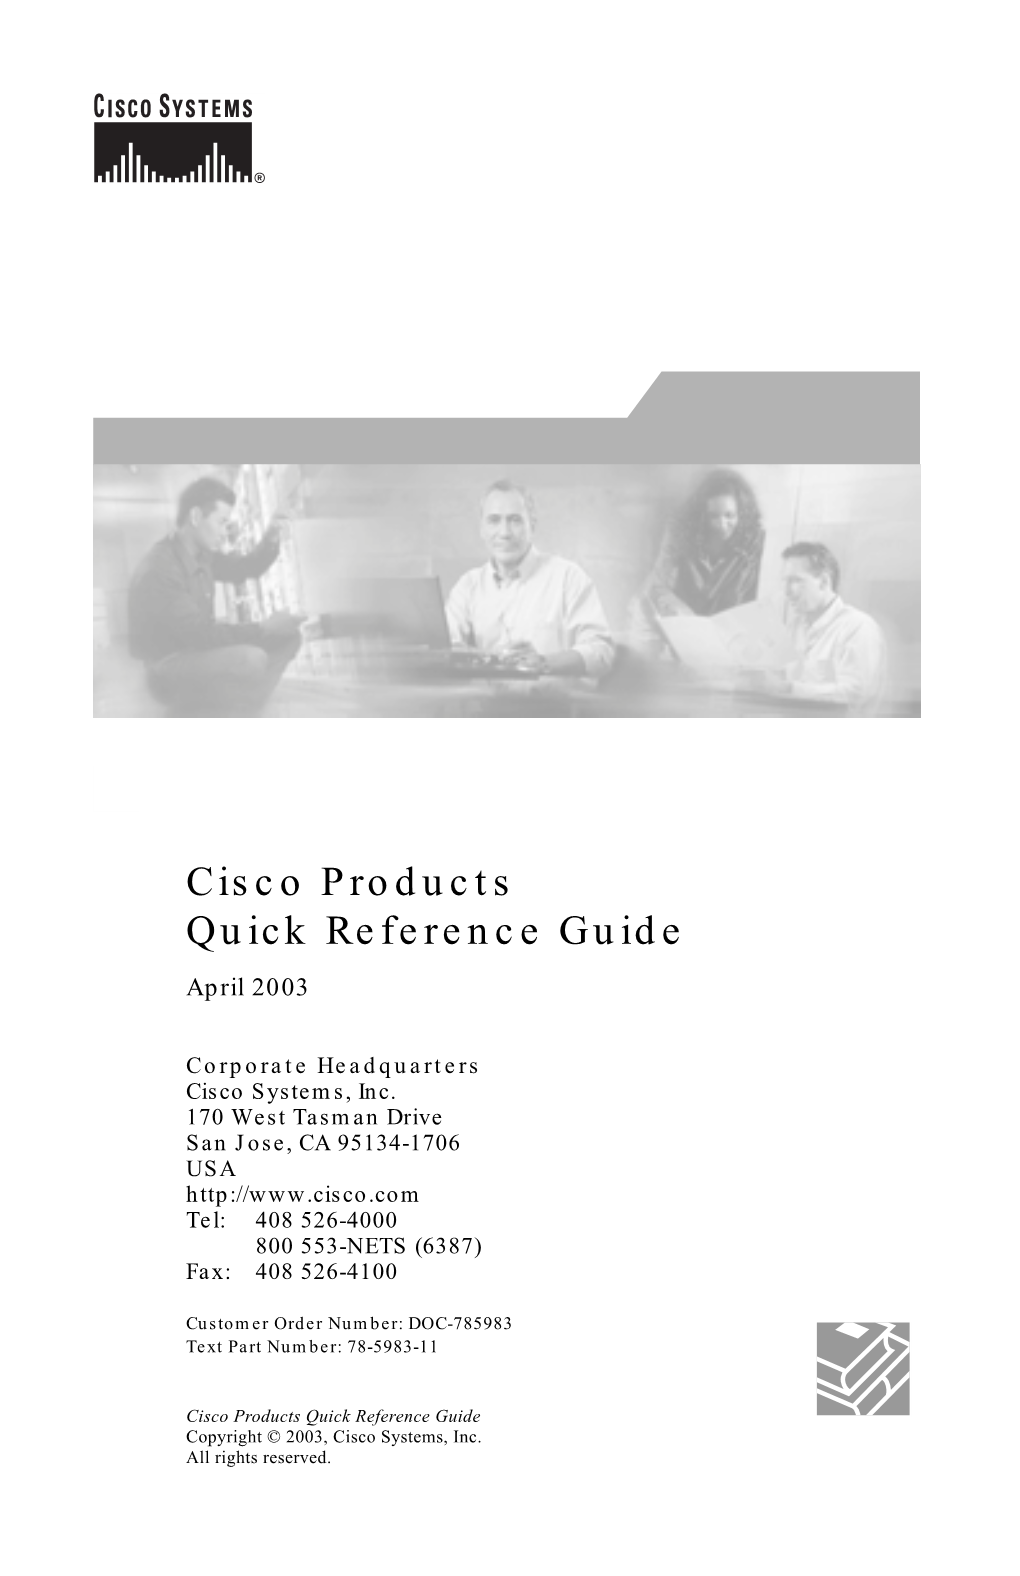 Cisco Products Quick Reference Guide April 2003